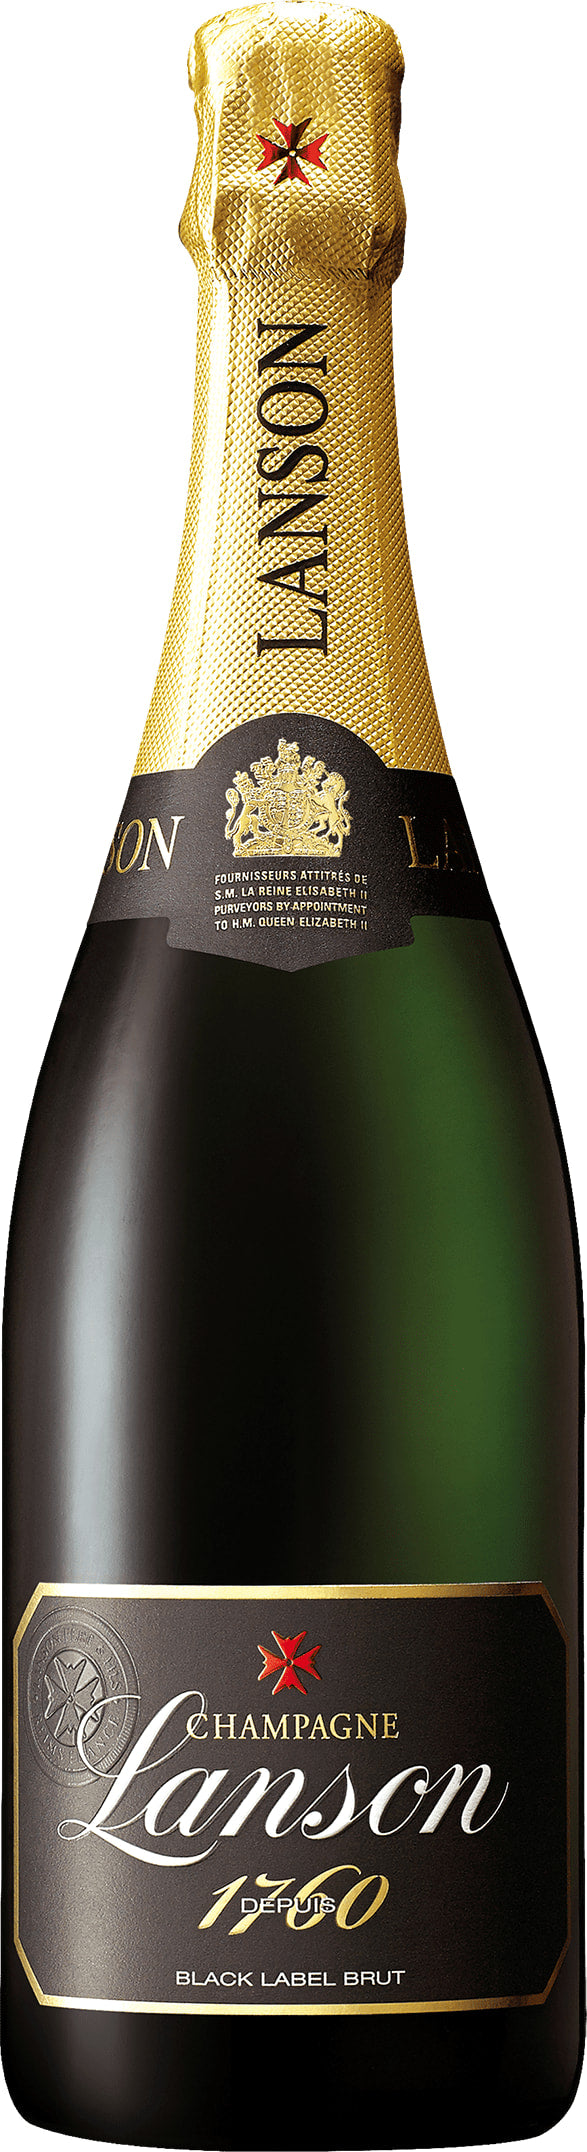 Lanson Black Label 75cl NV - Buy Lanson Wines from GREAT WINES DIRECT wine shop